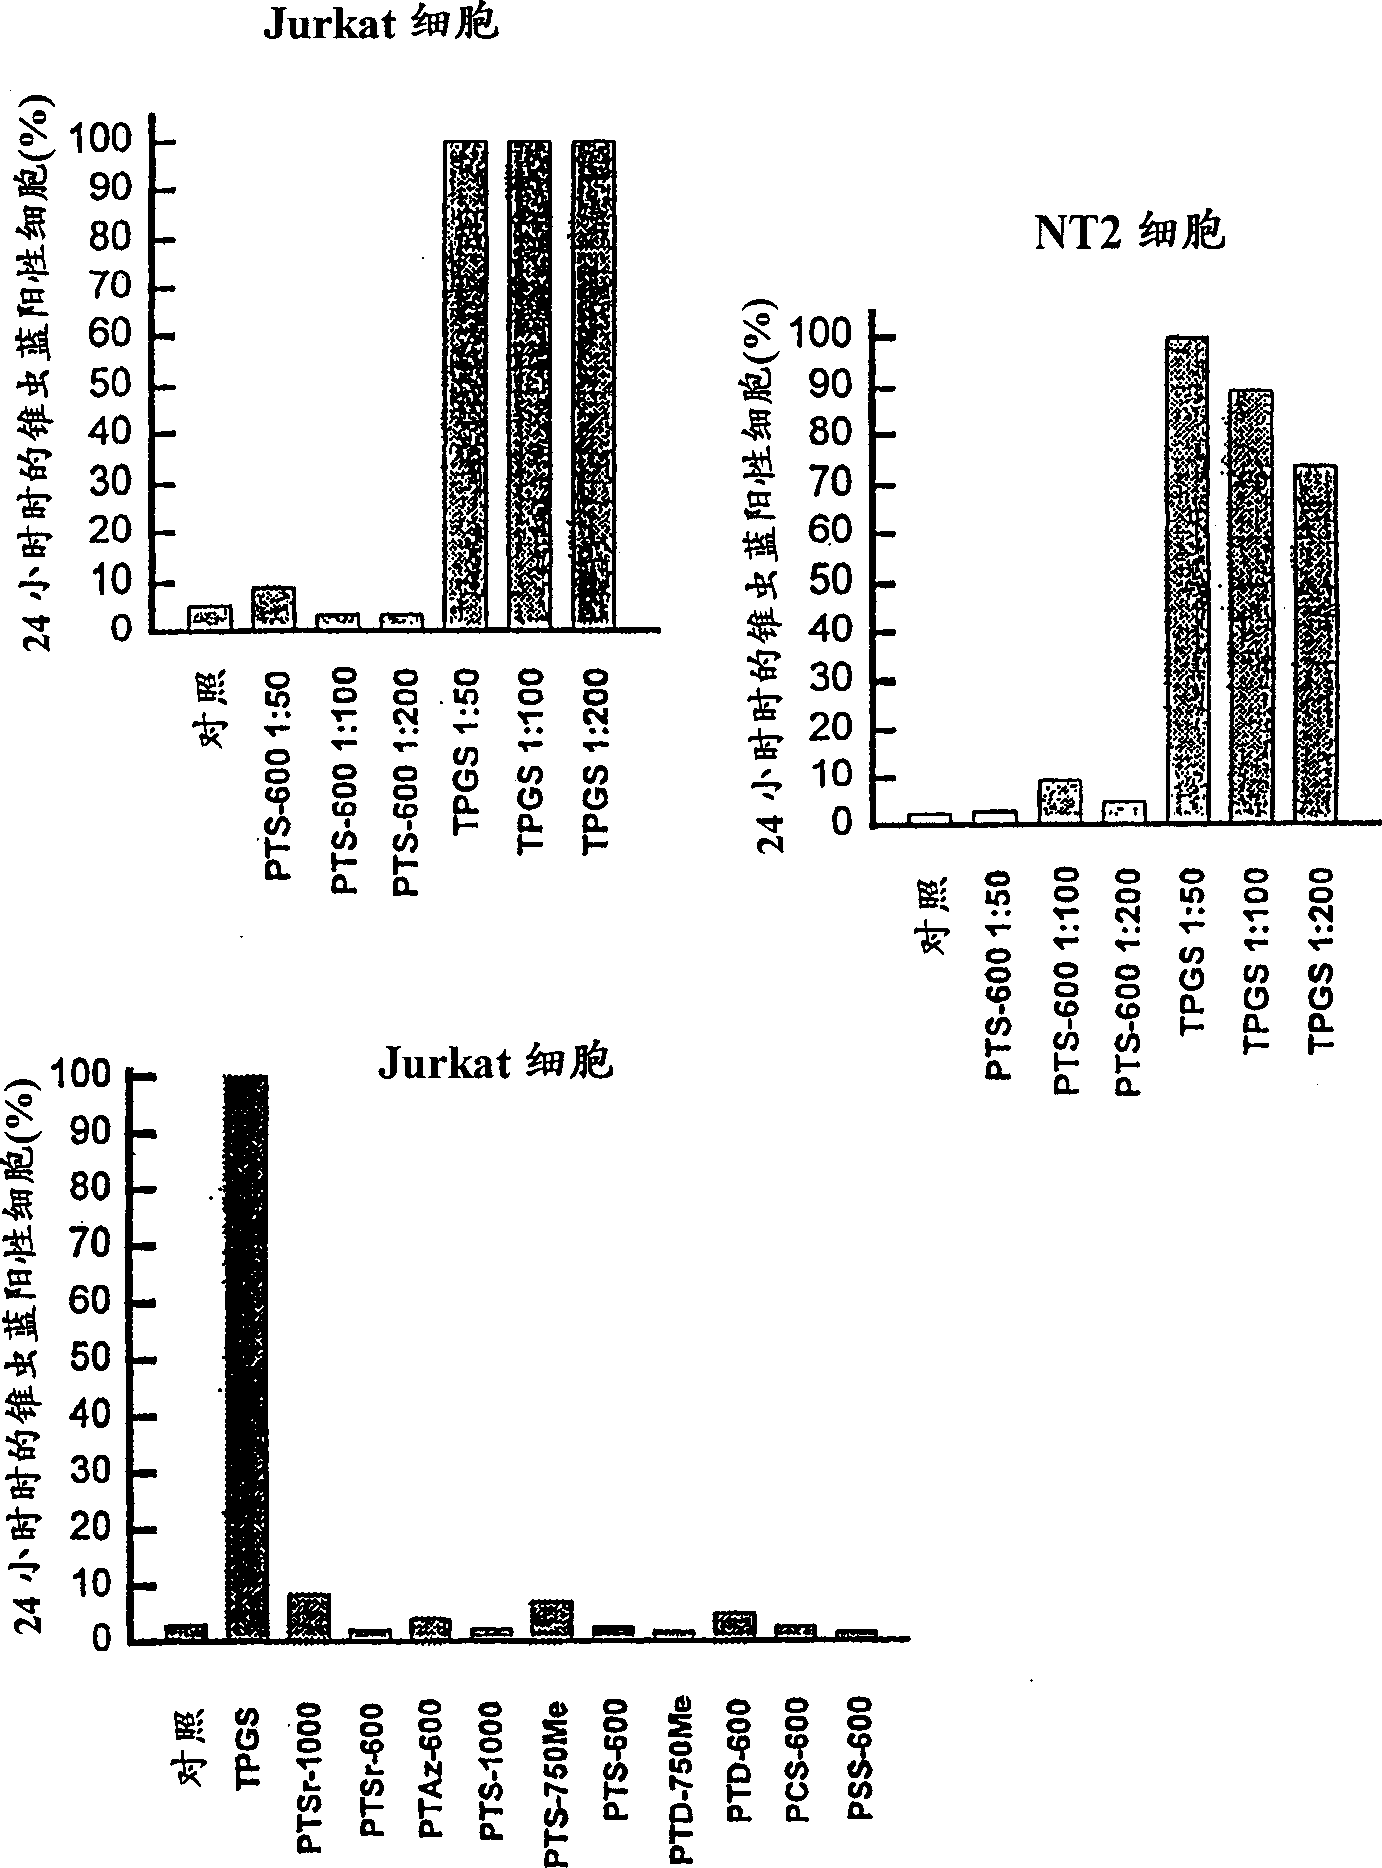 Water soluble compositions for bioactive lipophilic compounds